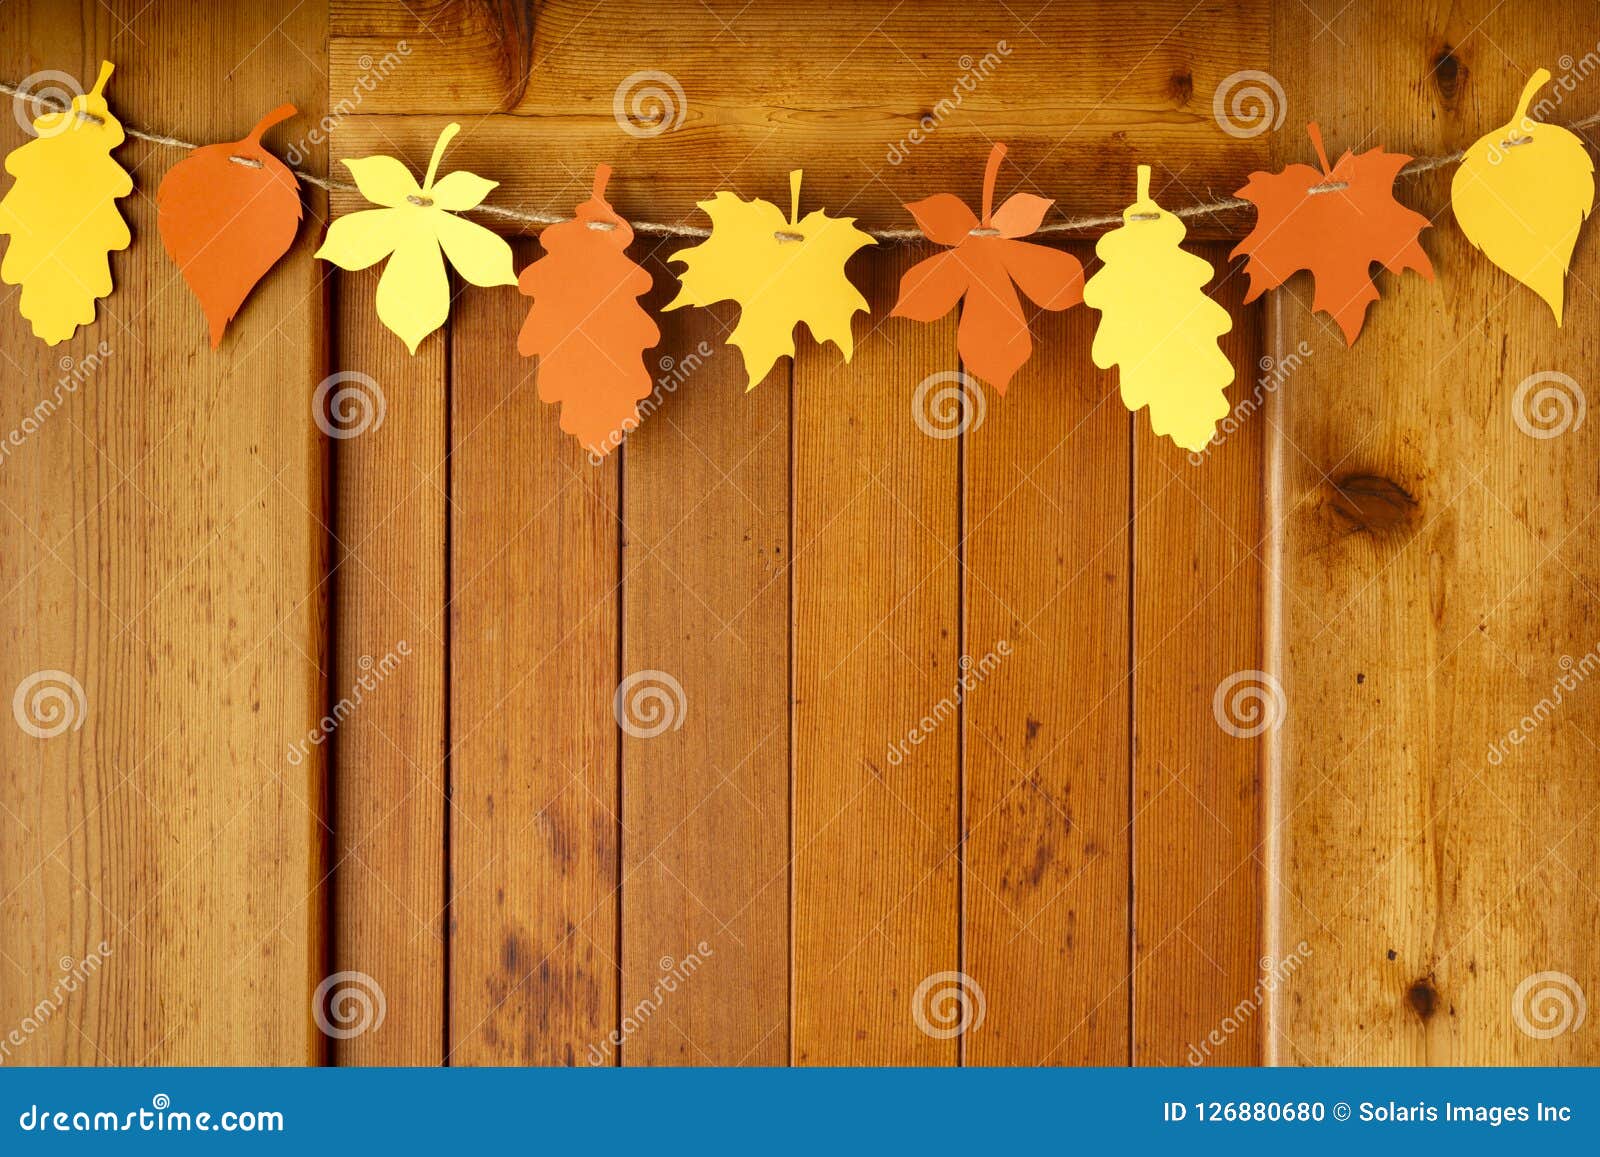 Simple, Rustic Country Style Fall Thanksgiving Home Decorations ...